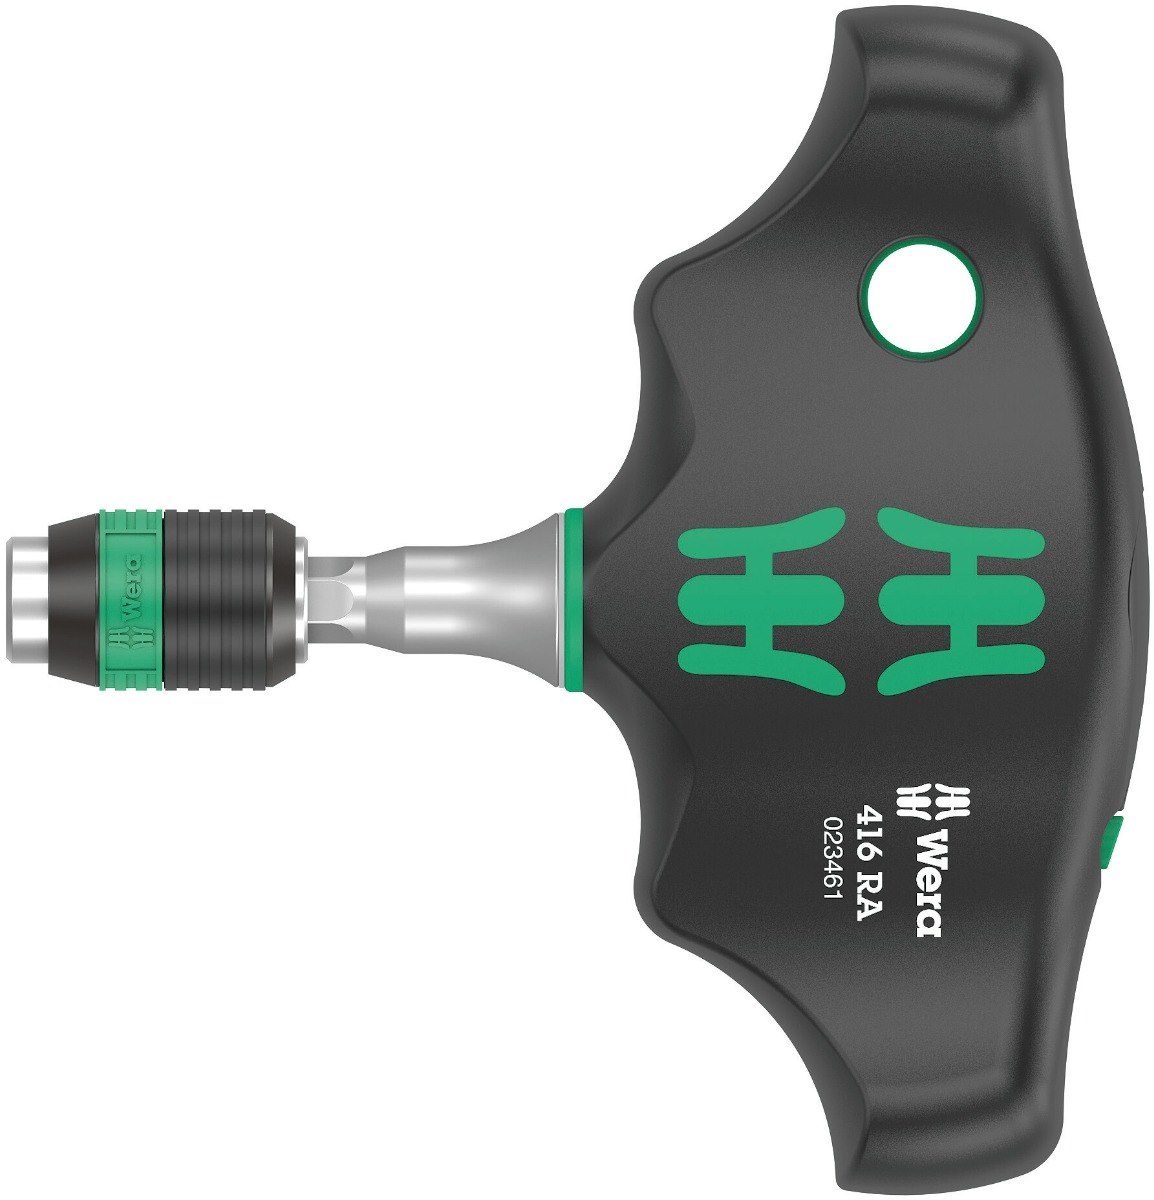 Wera 416 Ra T-Handle Bitholding Screwdriver With Ratchet Function And Rapidaptor Quick-Release Chuck